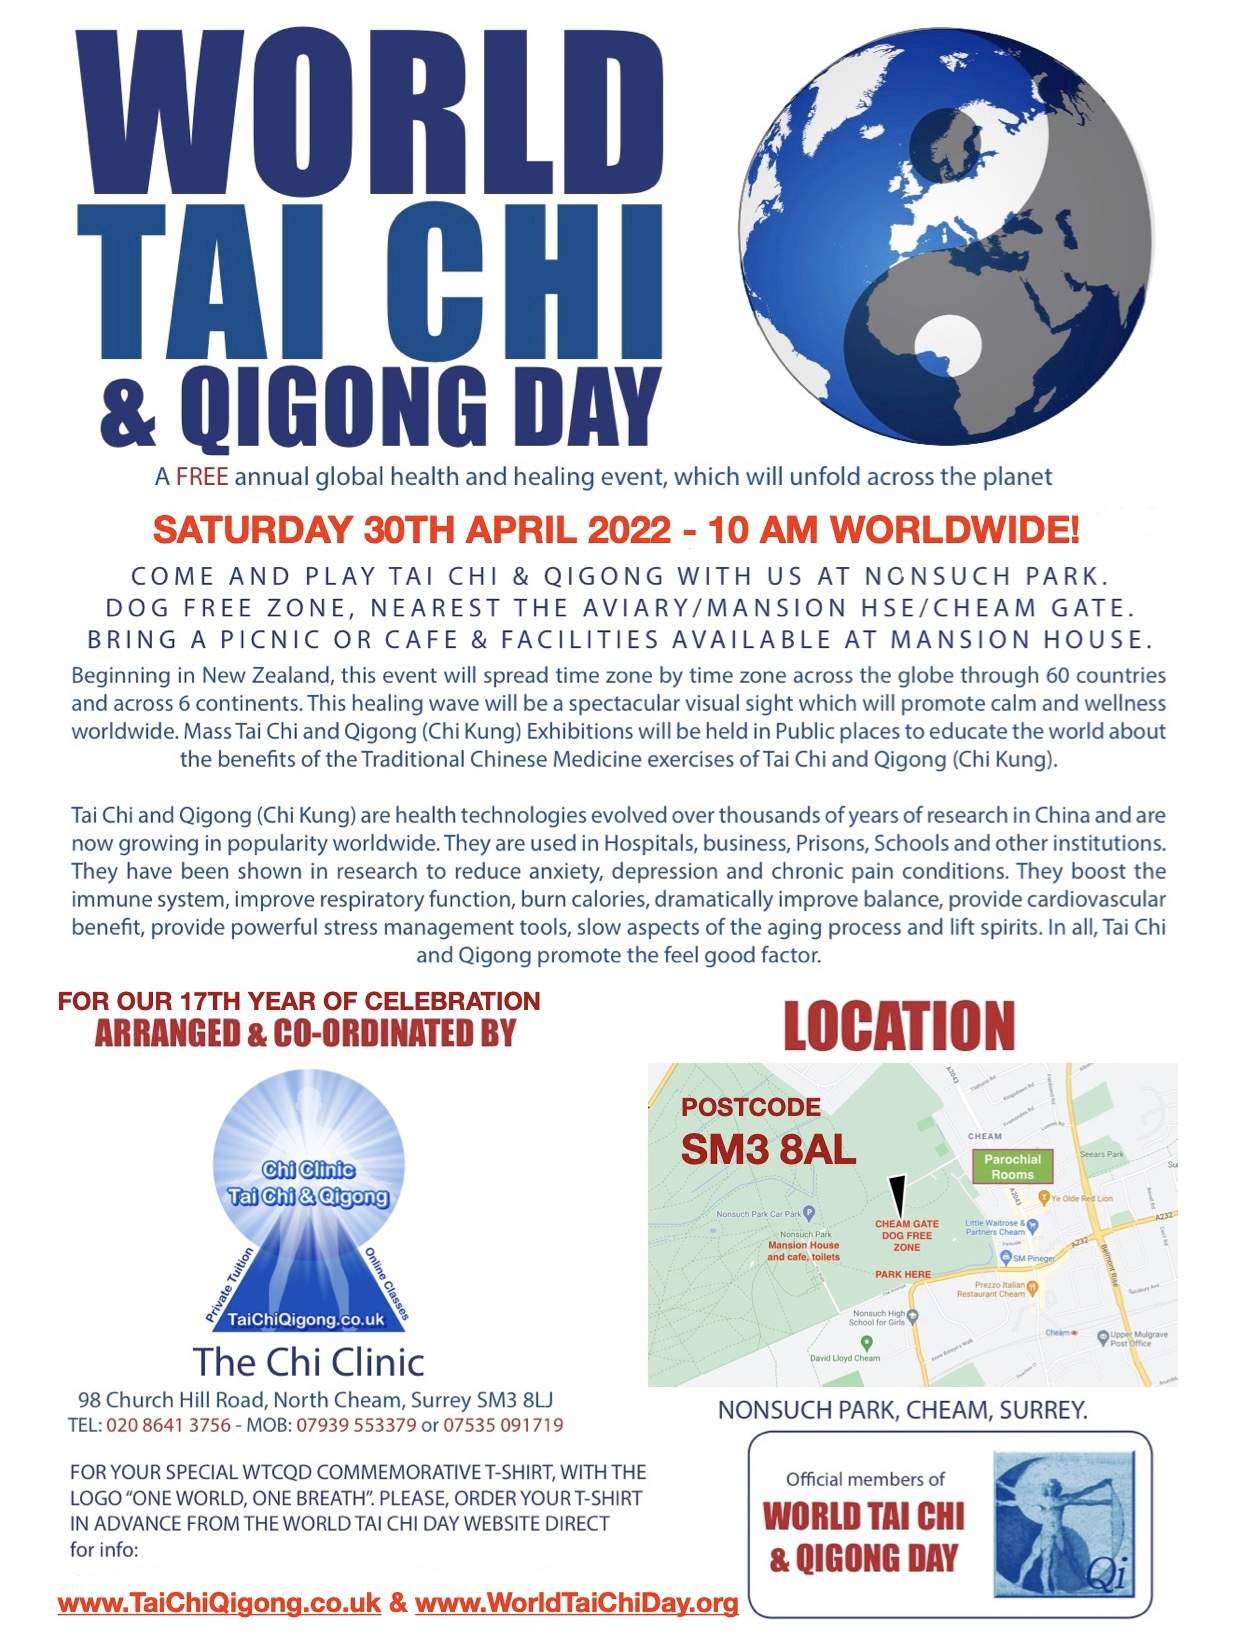 World Tai Chi Day, Tai Chi, Qigong, events in Nonsuch, Events in Cheam, Fitness,